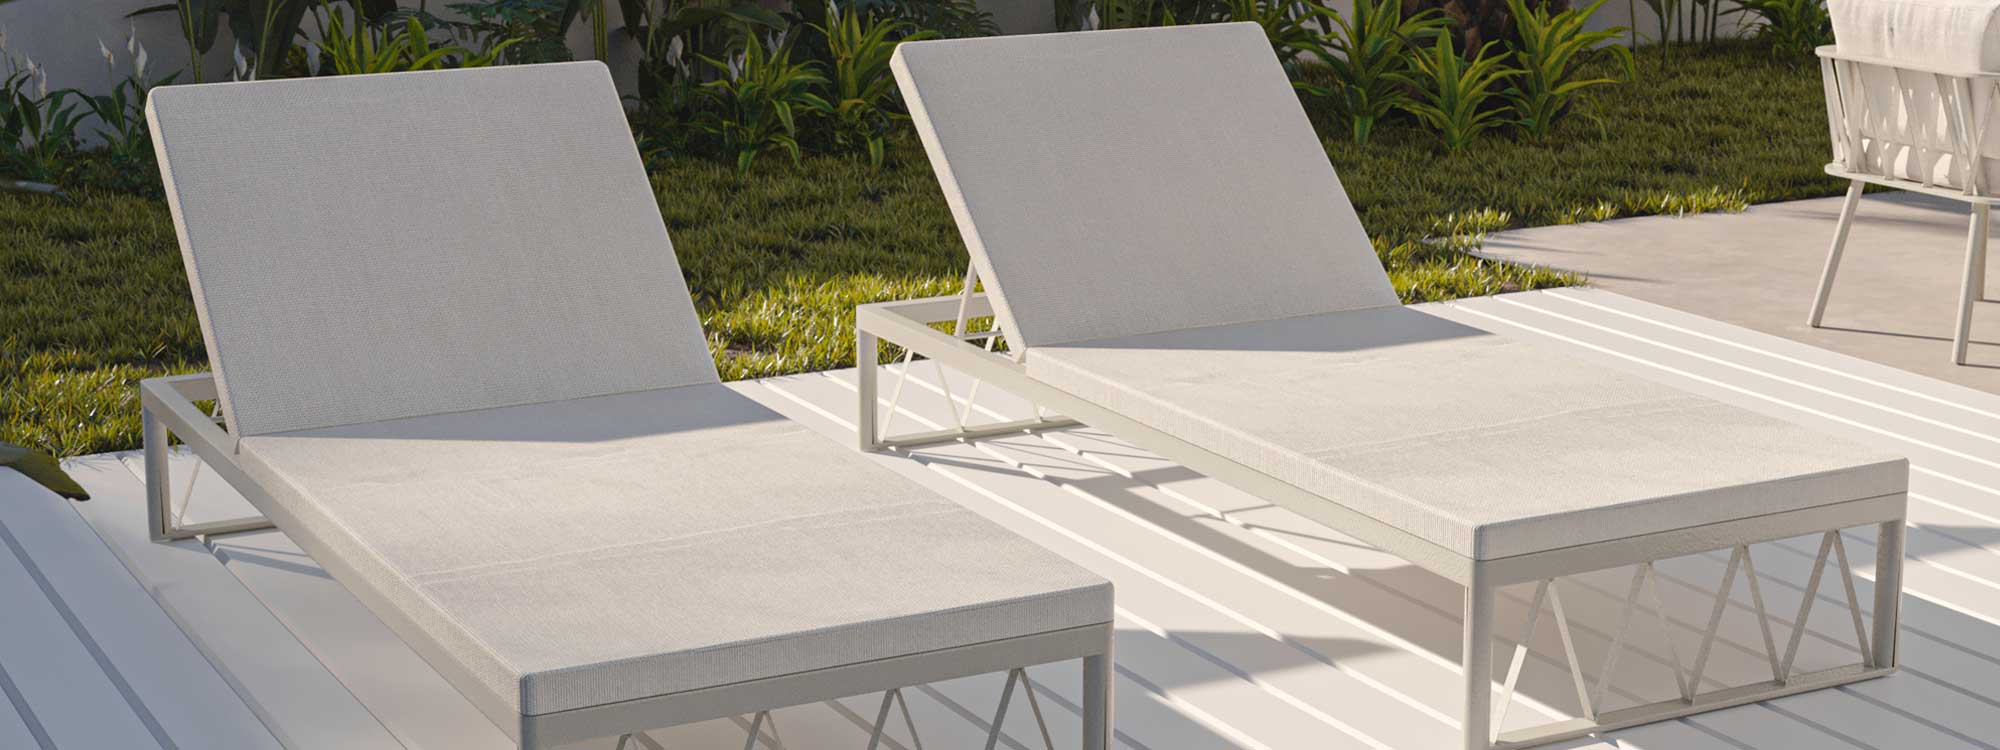 Image of pair of Oiside Ava white sun loungers on white decking in the sun